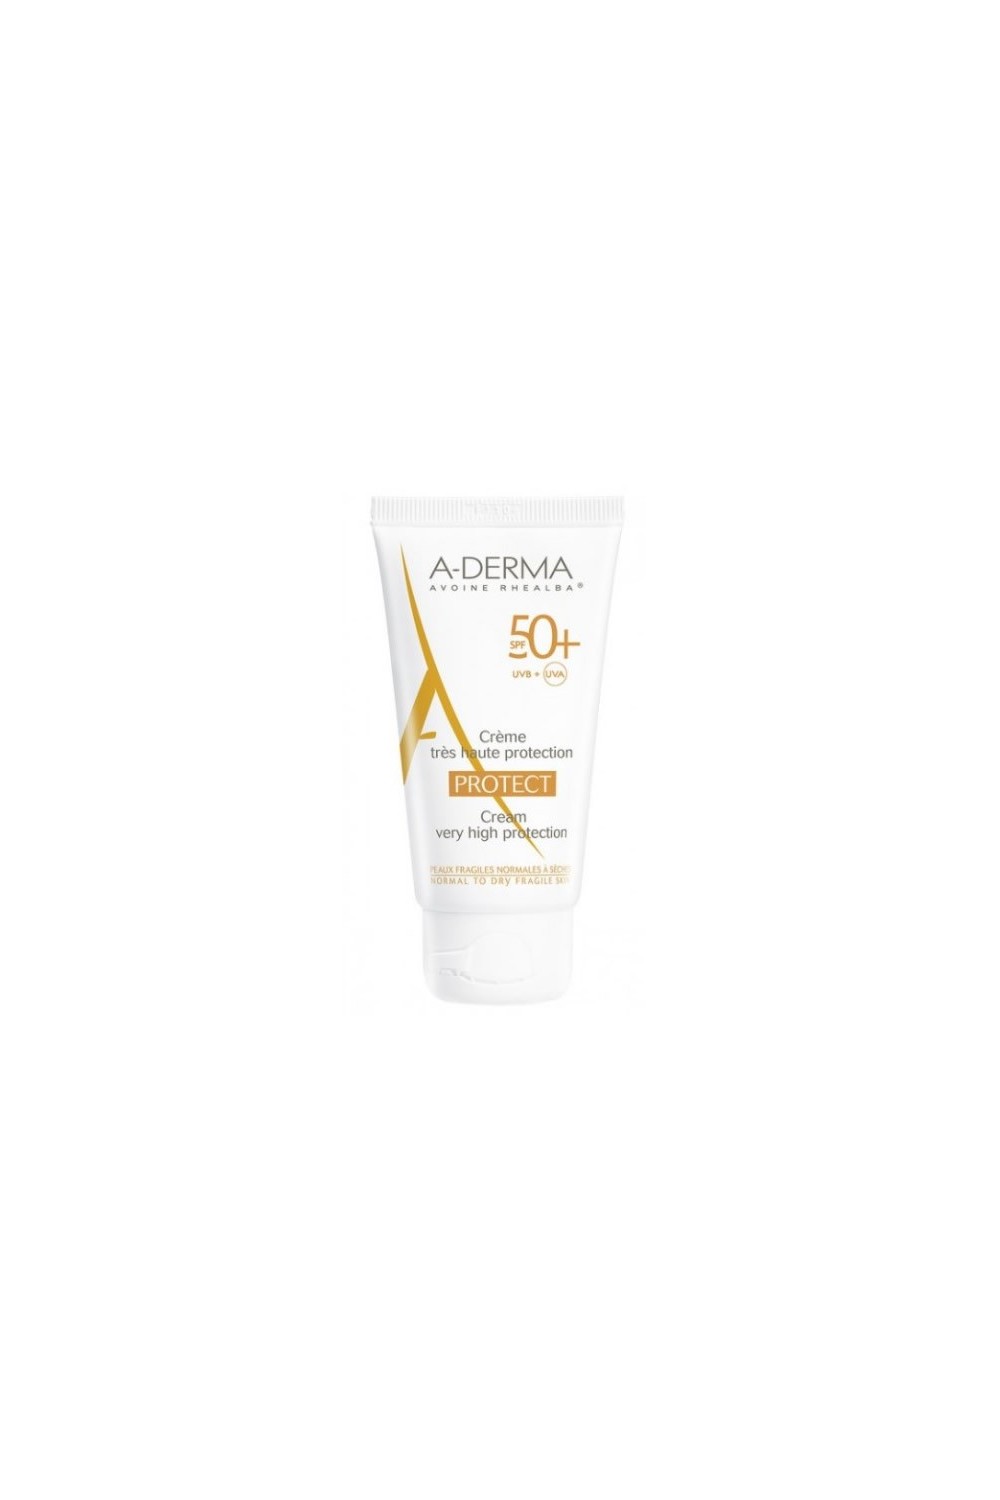 A-Derma Protect Very High Protection Cream Spf50 + 40ml